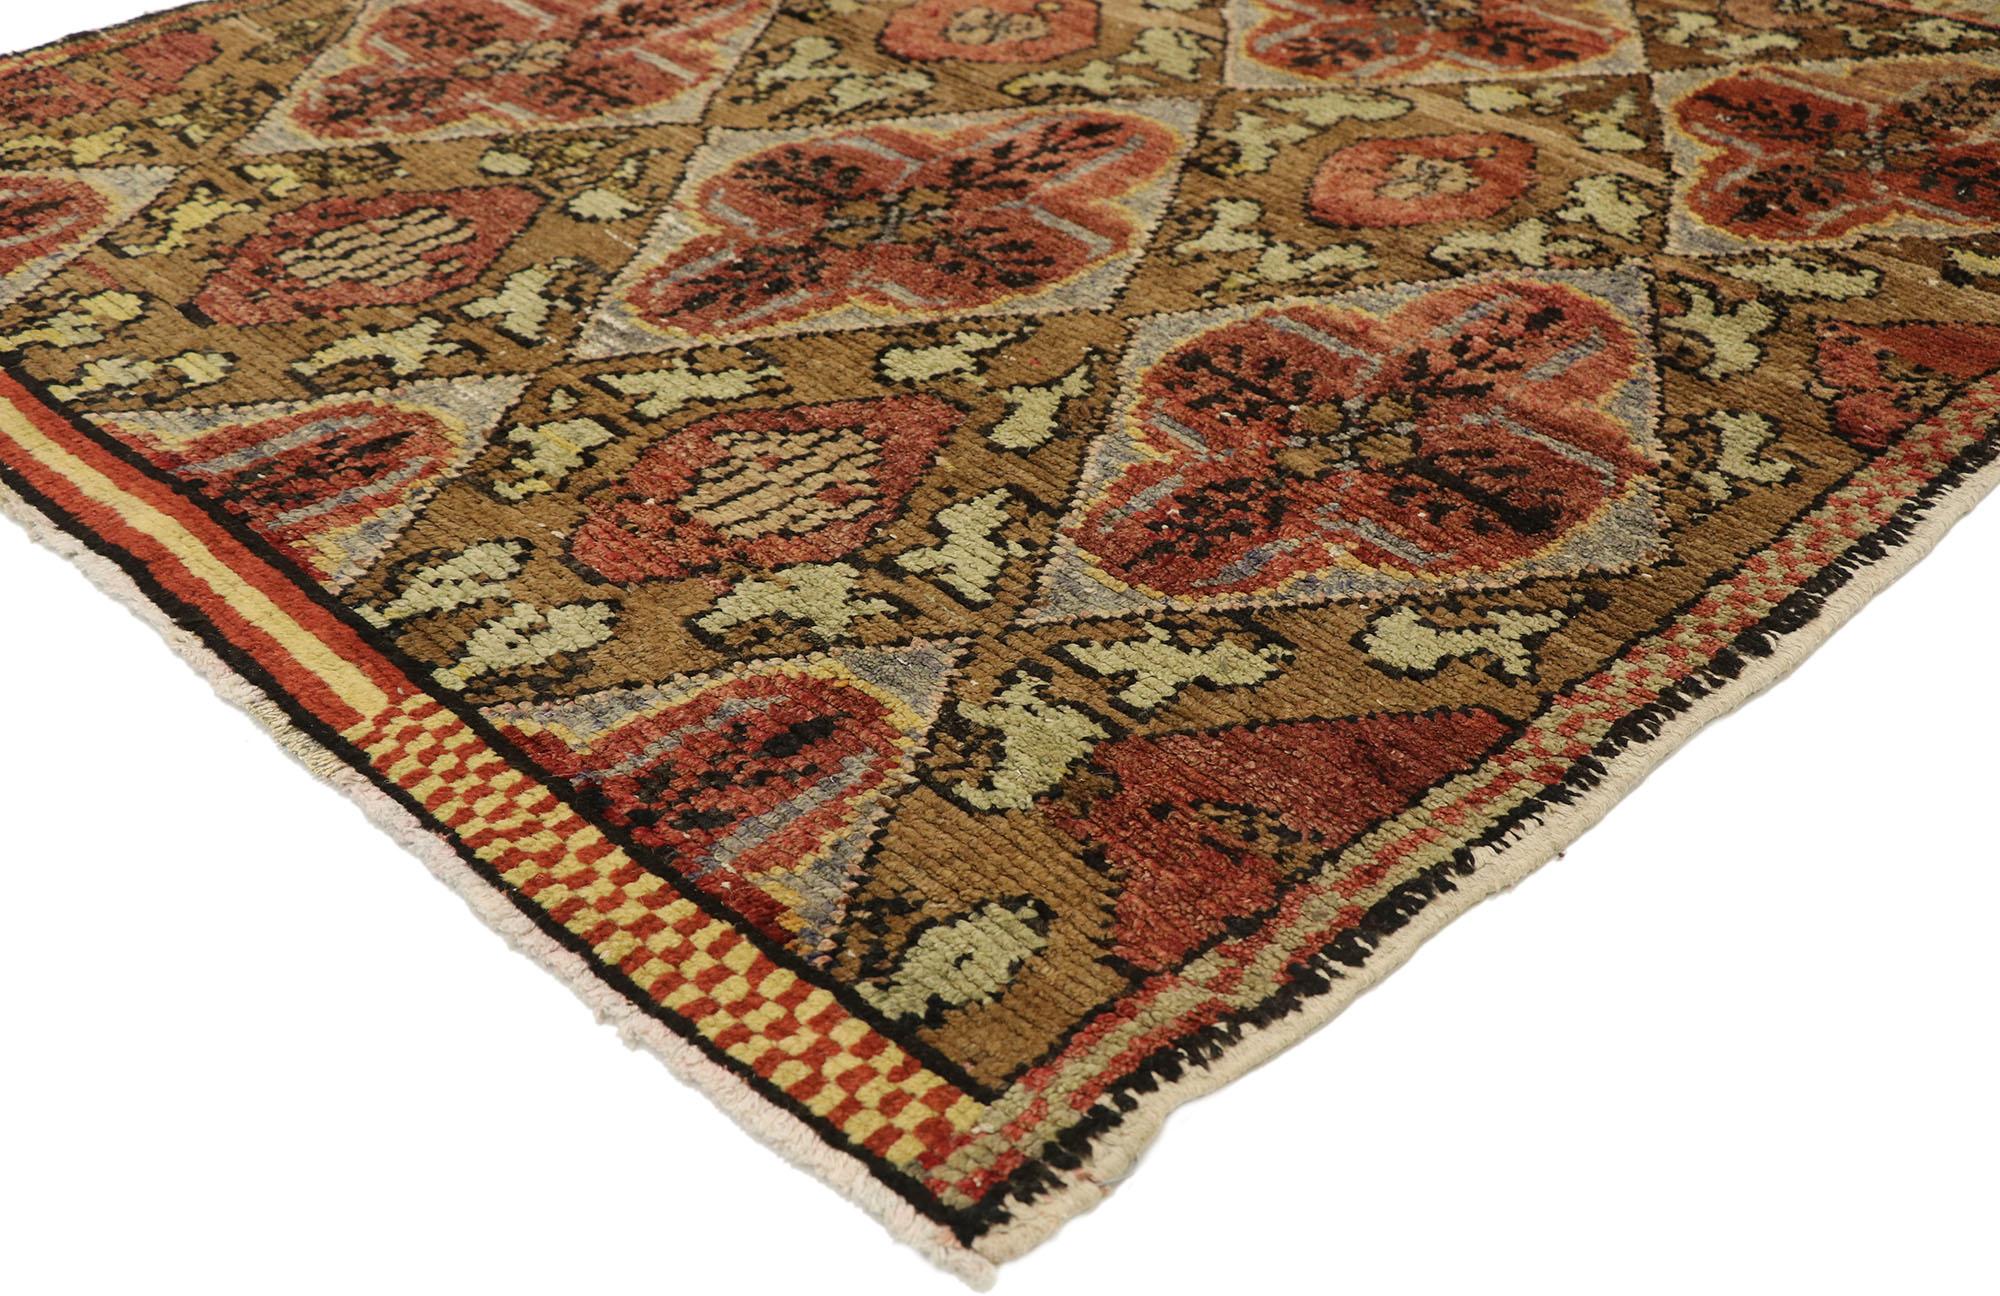 51081 vintage Turkish Oushak rug with rustic Elizabethan style. Regal and refined with a repeating pattern, this hand knotted wool antique Persian Kashan rug is poised to impress. Characterized by predominantly Elizabethan style and French influence